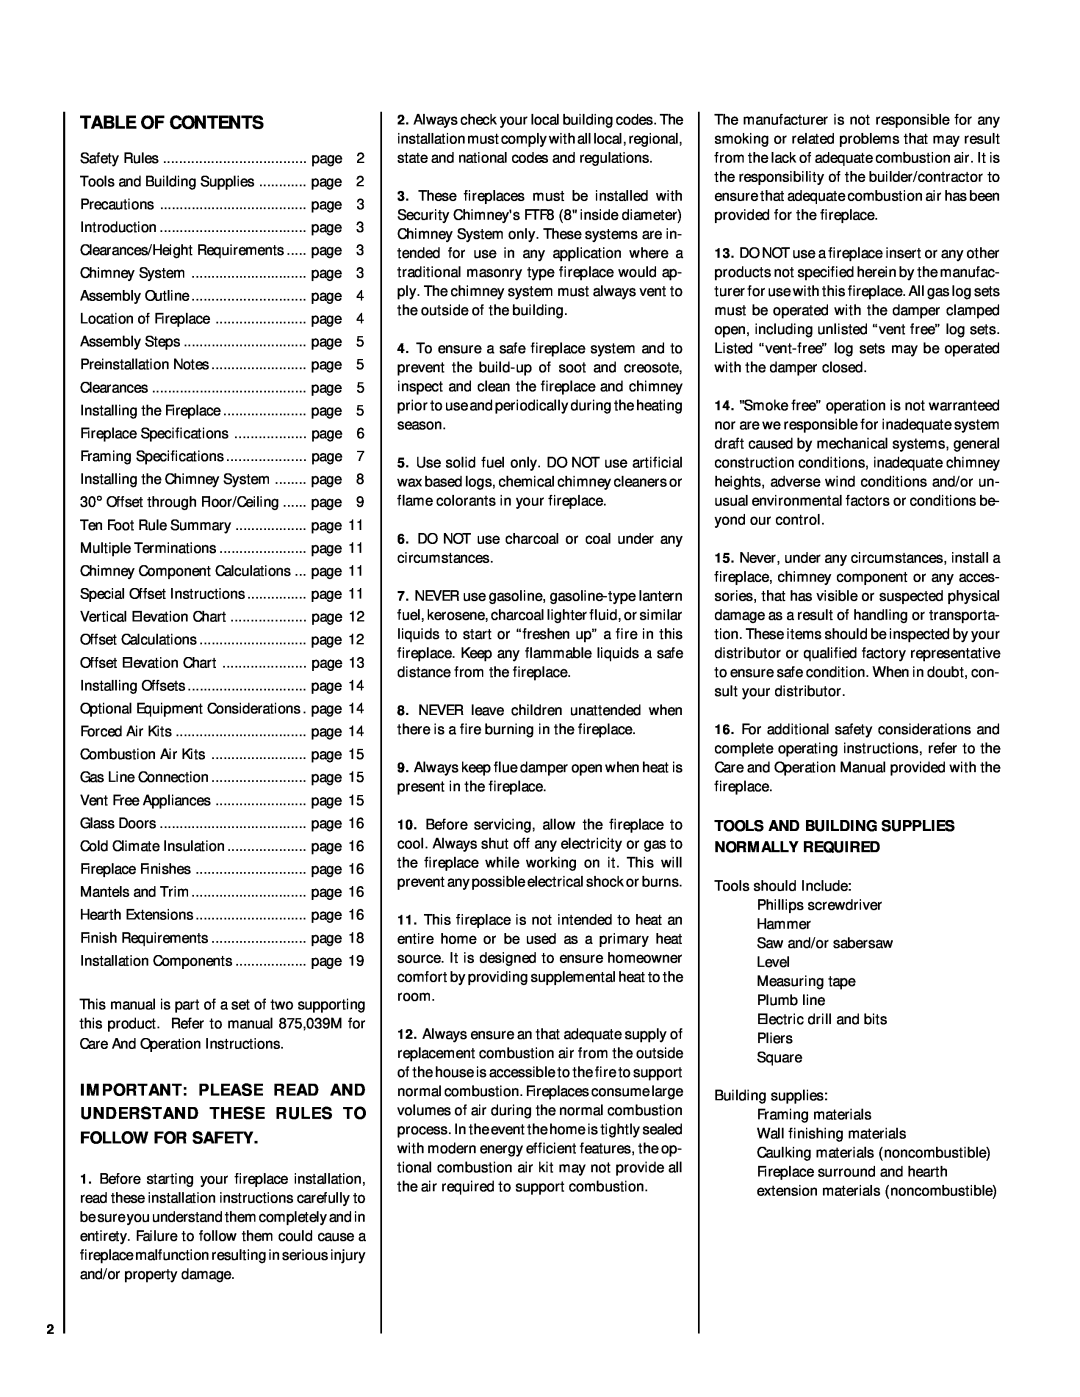 Lennox Hearth HCI-42-H, RDI-42-H Table Of Contents, Tools And Building Supplies Normally Required 